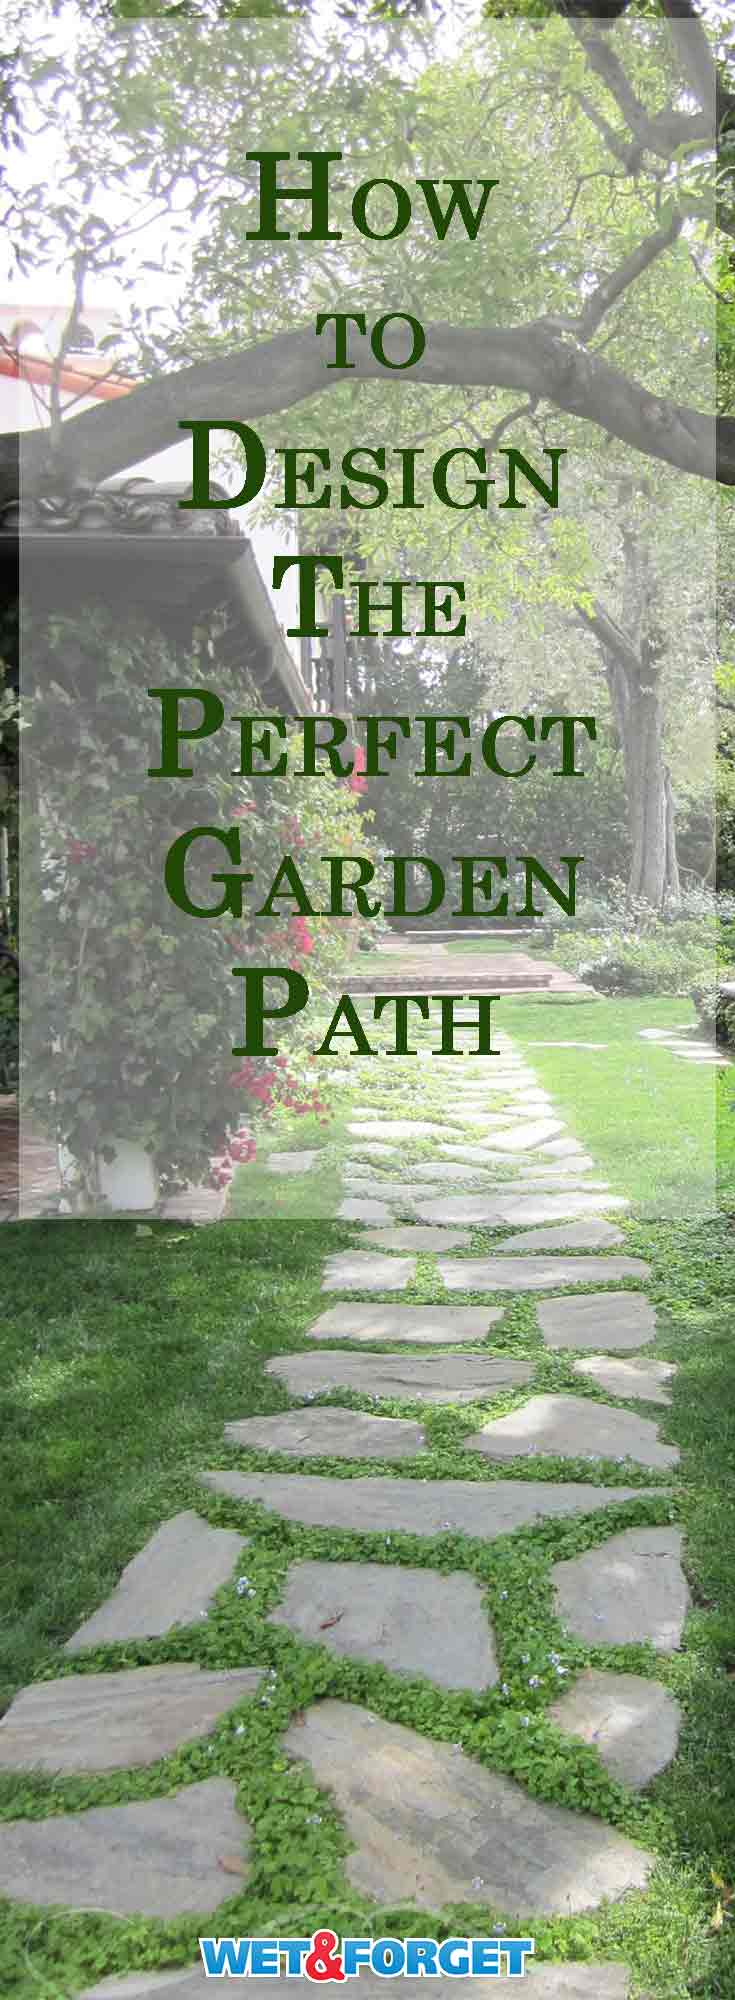 The most beautiful gardens include garden paths that please the eye, invite a stroll around the property, and accent the landscape. A well-designed, well-built garden path can be a work of art all on its own.